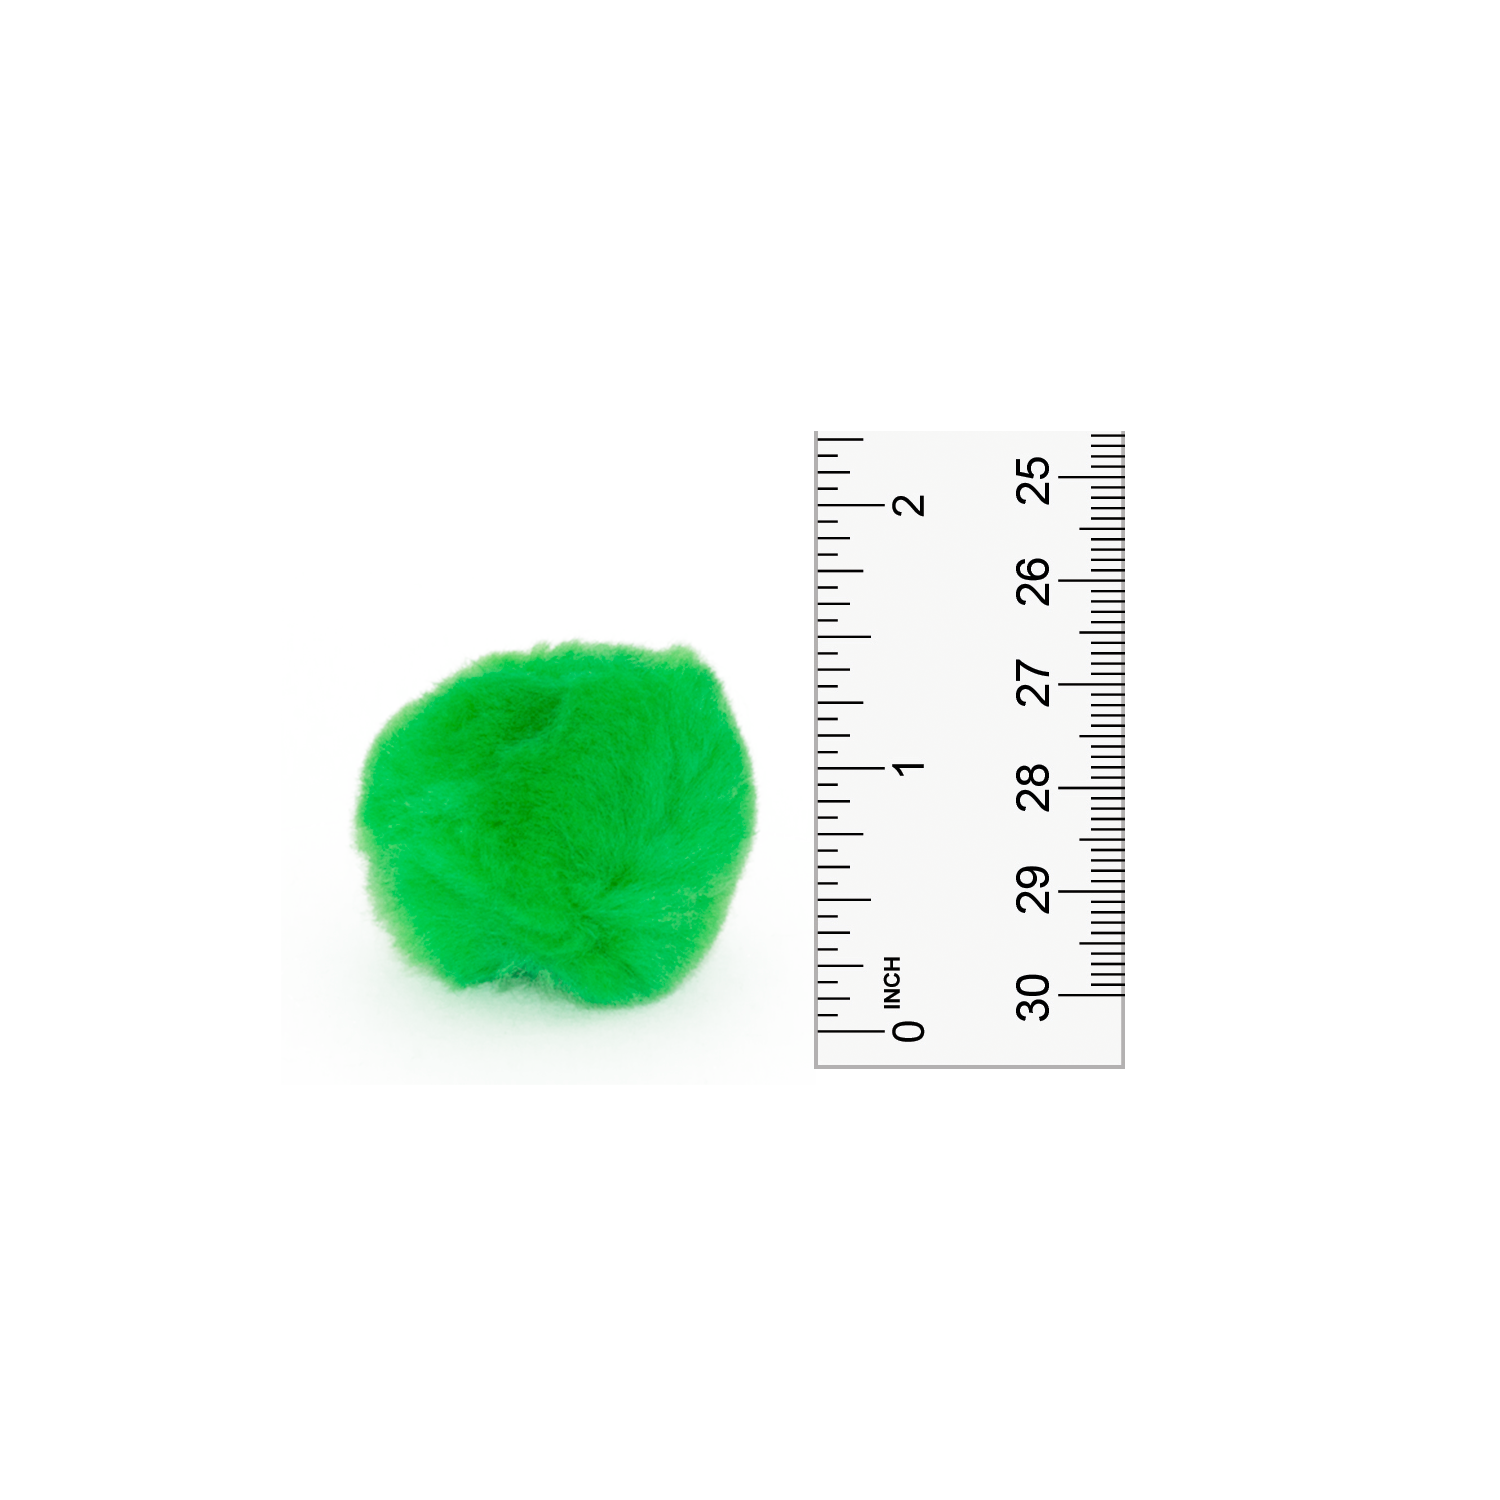  LOKUNN 1 Inch Pom Poms, Green Pom Poms for Arts and Craft, Soft  and Fluffy Pom Pom Balls with Self-Adhesive Eyes, Pompoms for DIY Art  Creative Crafts : Everything Else